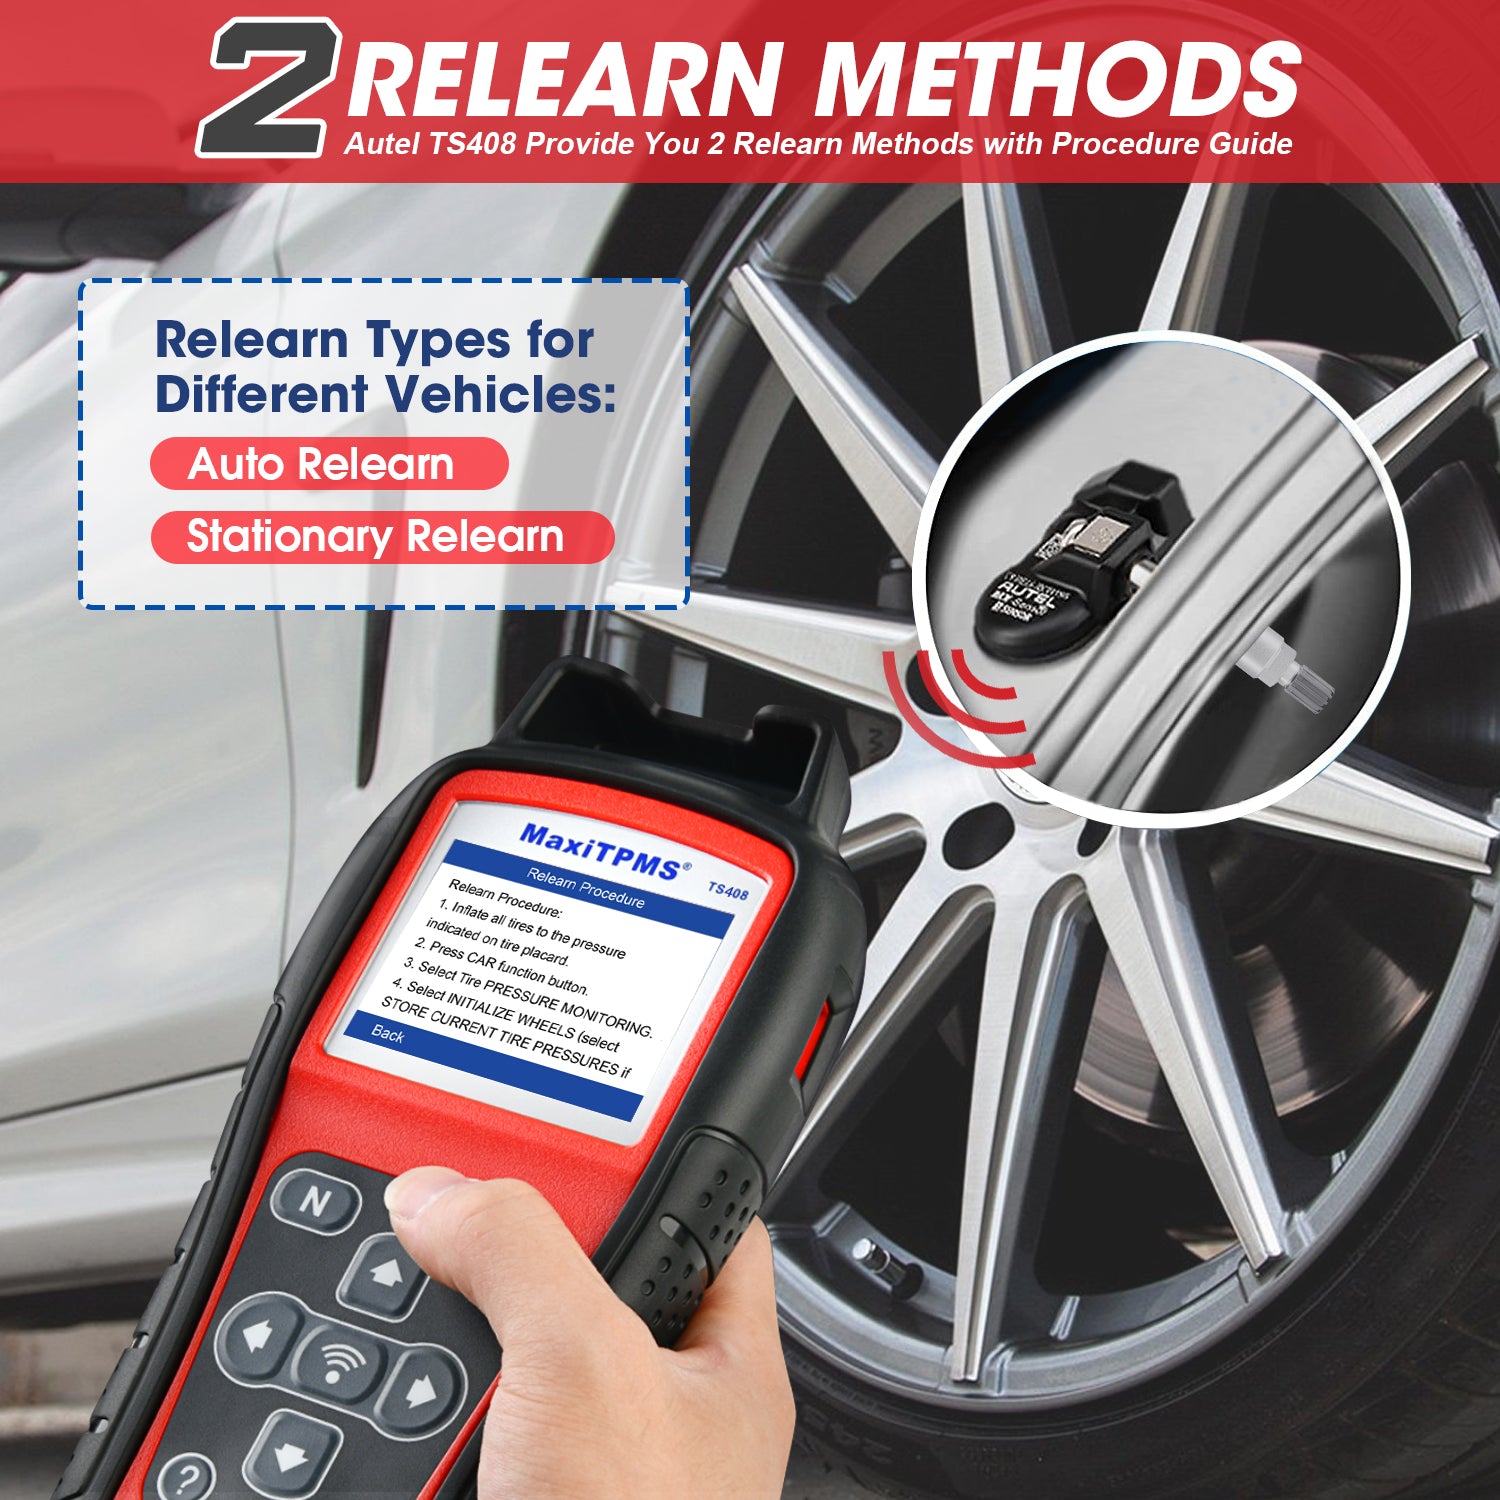 Products
Autel MaxiTPMS TS408 TPMS Service Tool Provides 2 Ways to Relearn New TPMS Sensors